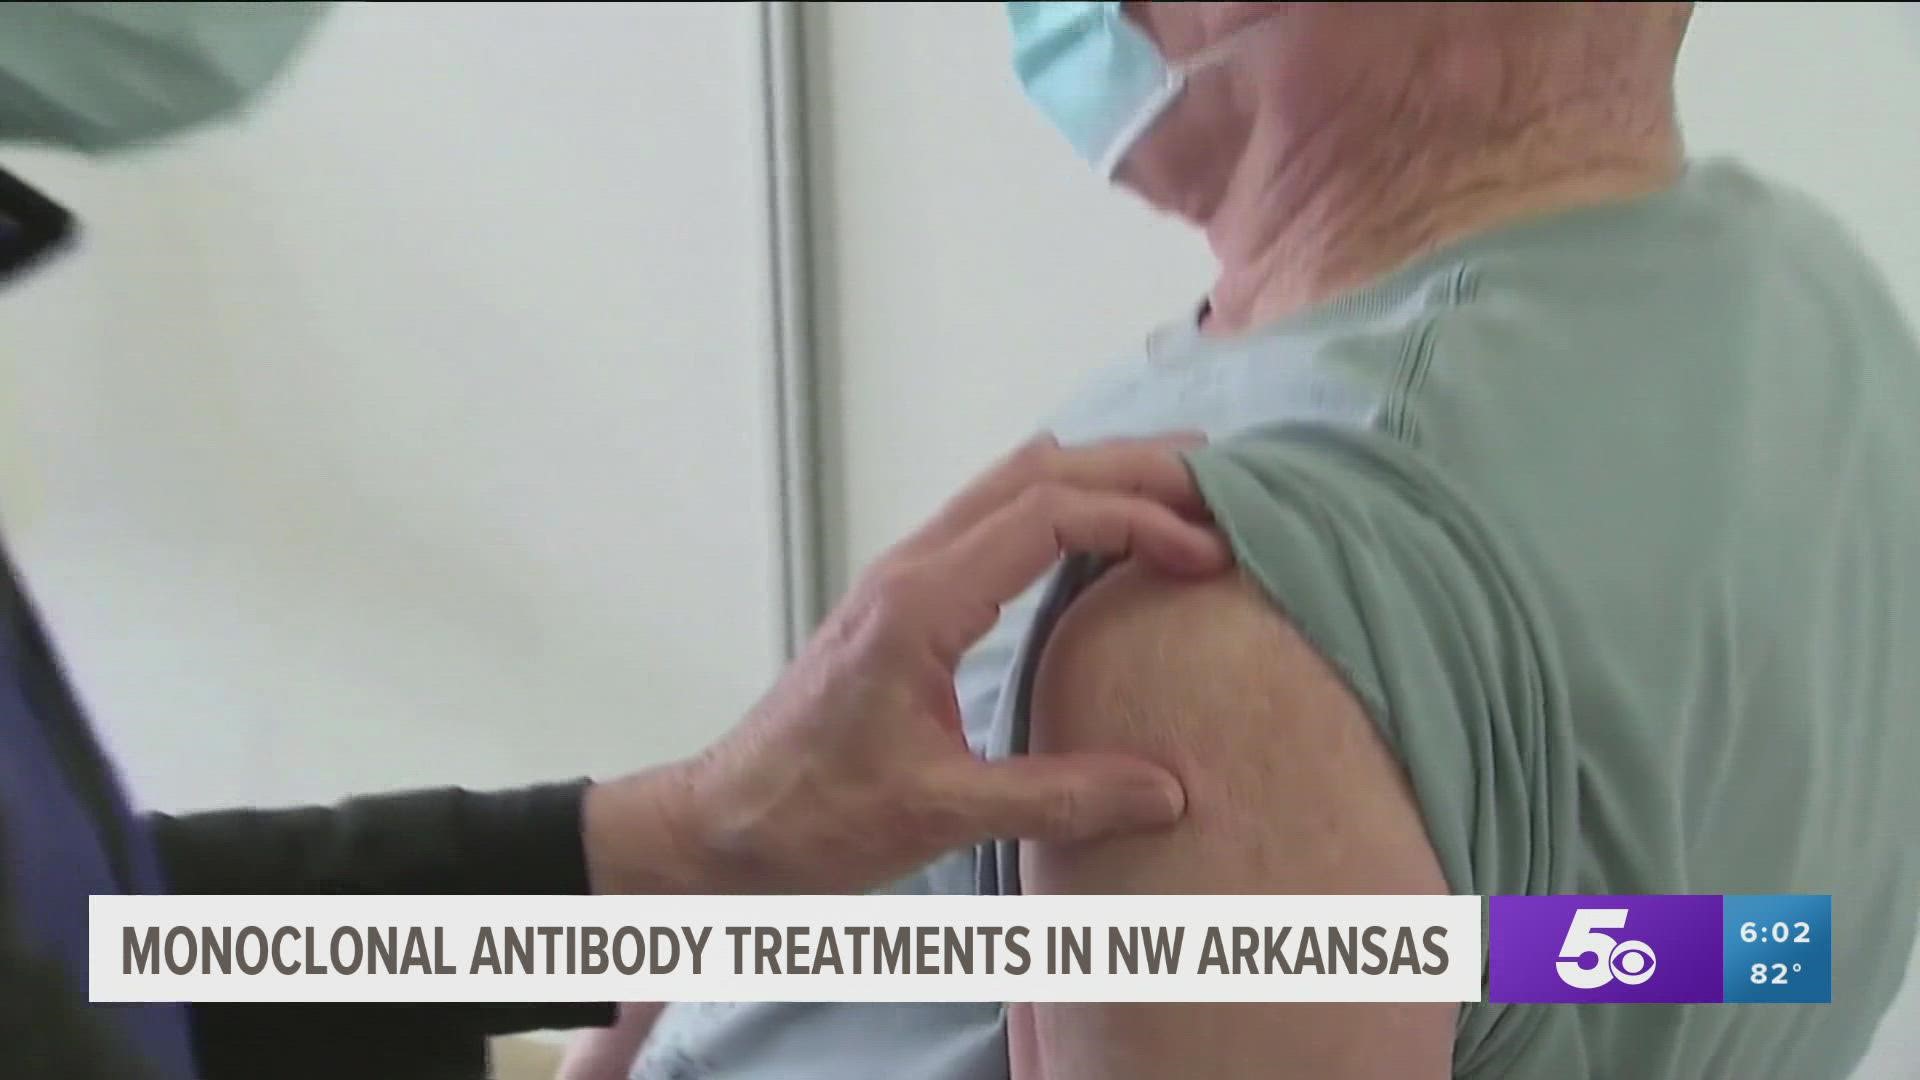 In an effort to keep people out of the hospital, UAMS and Washington Regional are offering monoclonal antibody injections to those with COVID-19.